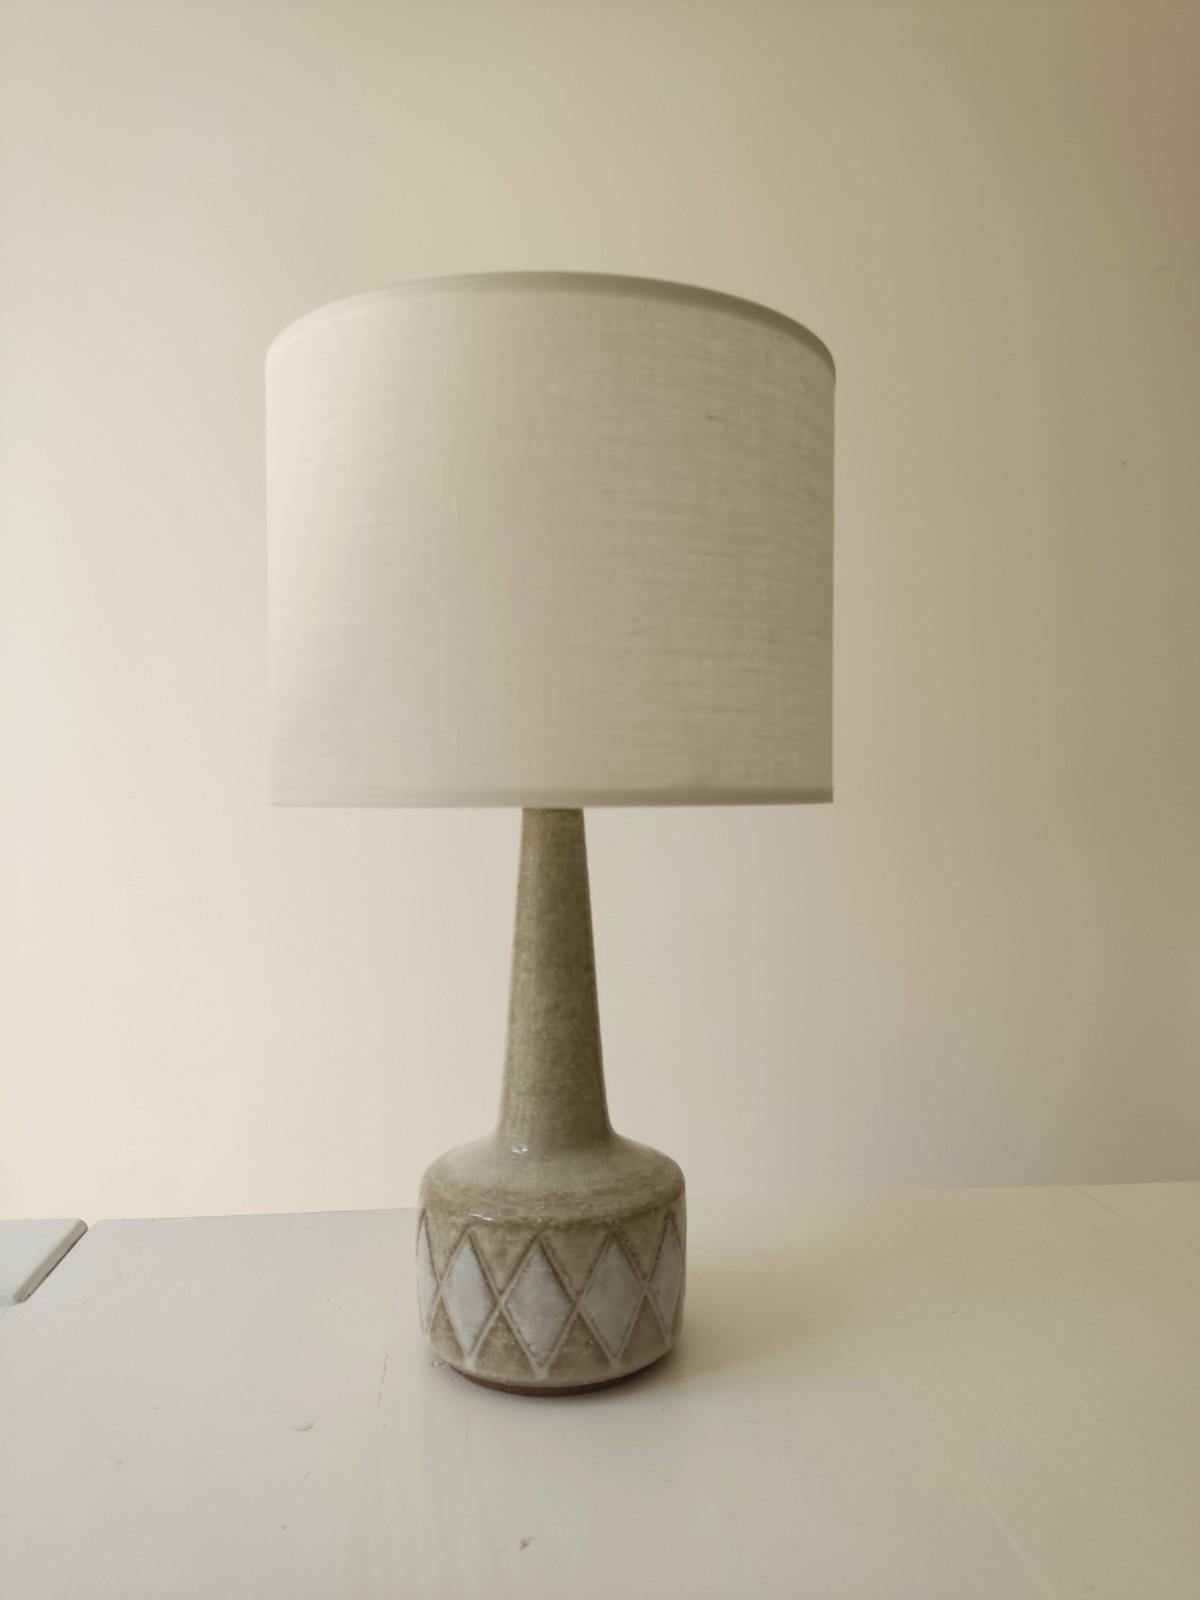 Rare Danish Palshus table lamp by Per Linnemann Schmidt - Denmark, 1960
Palshus produces work that uses chamotte techniques. This format is considered in Denmark as the crown jewels.
The lampshade as well as the electrical systems are